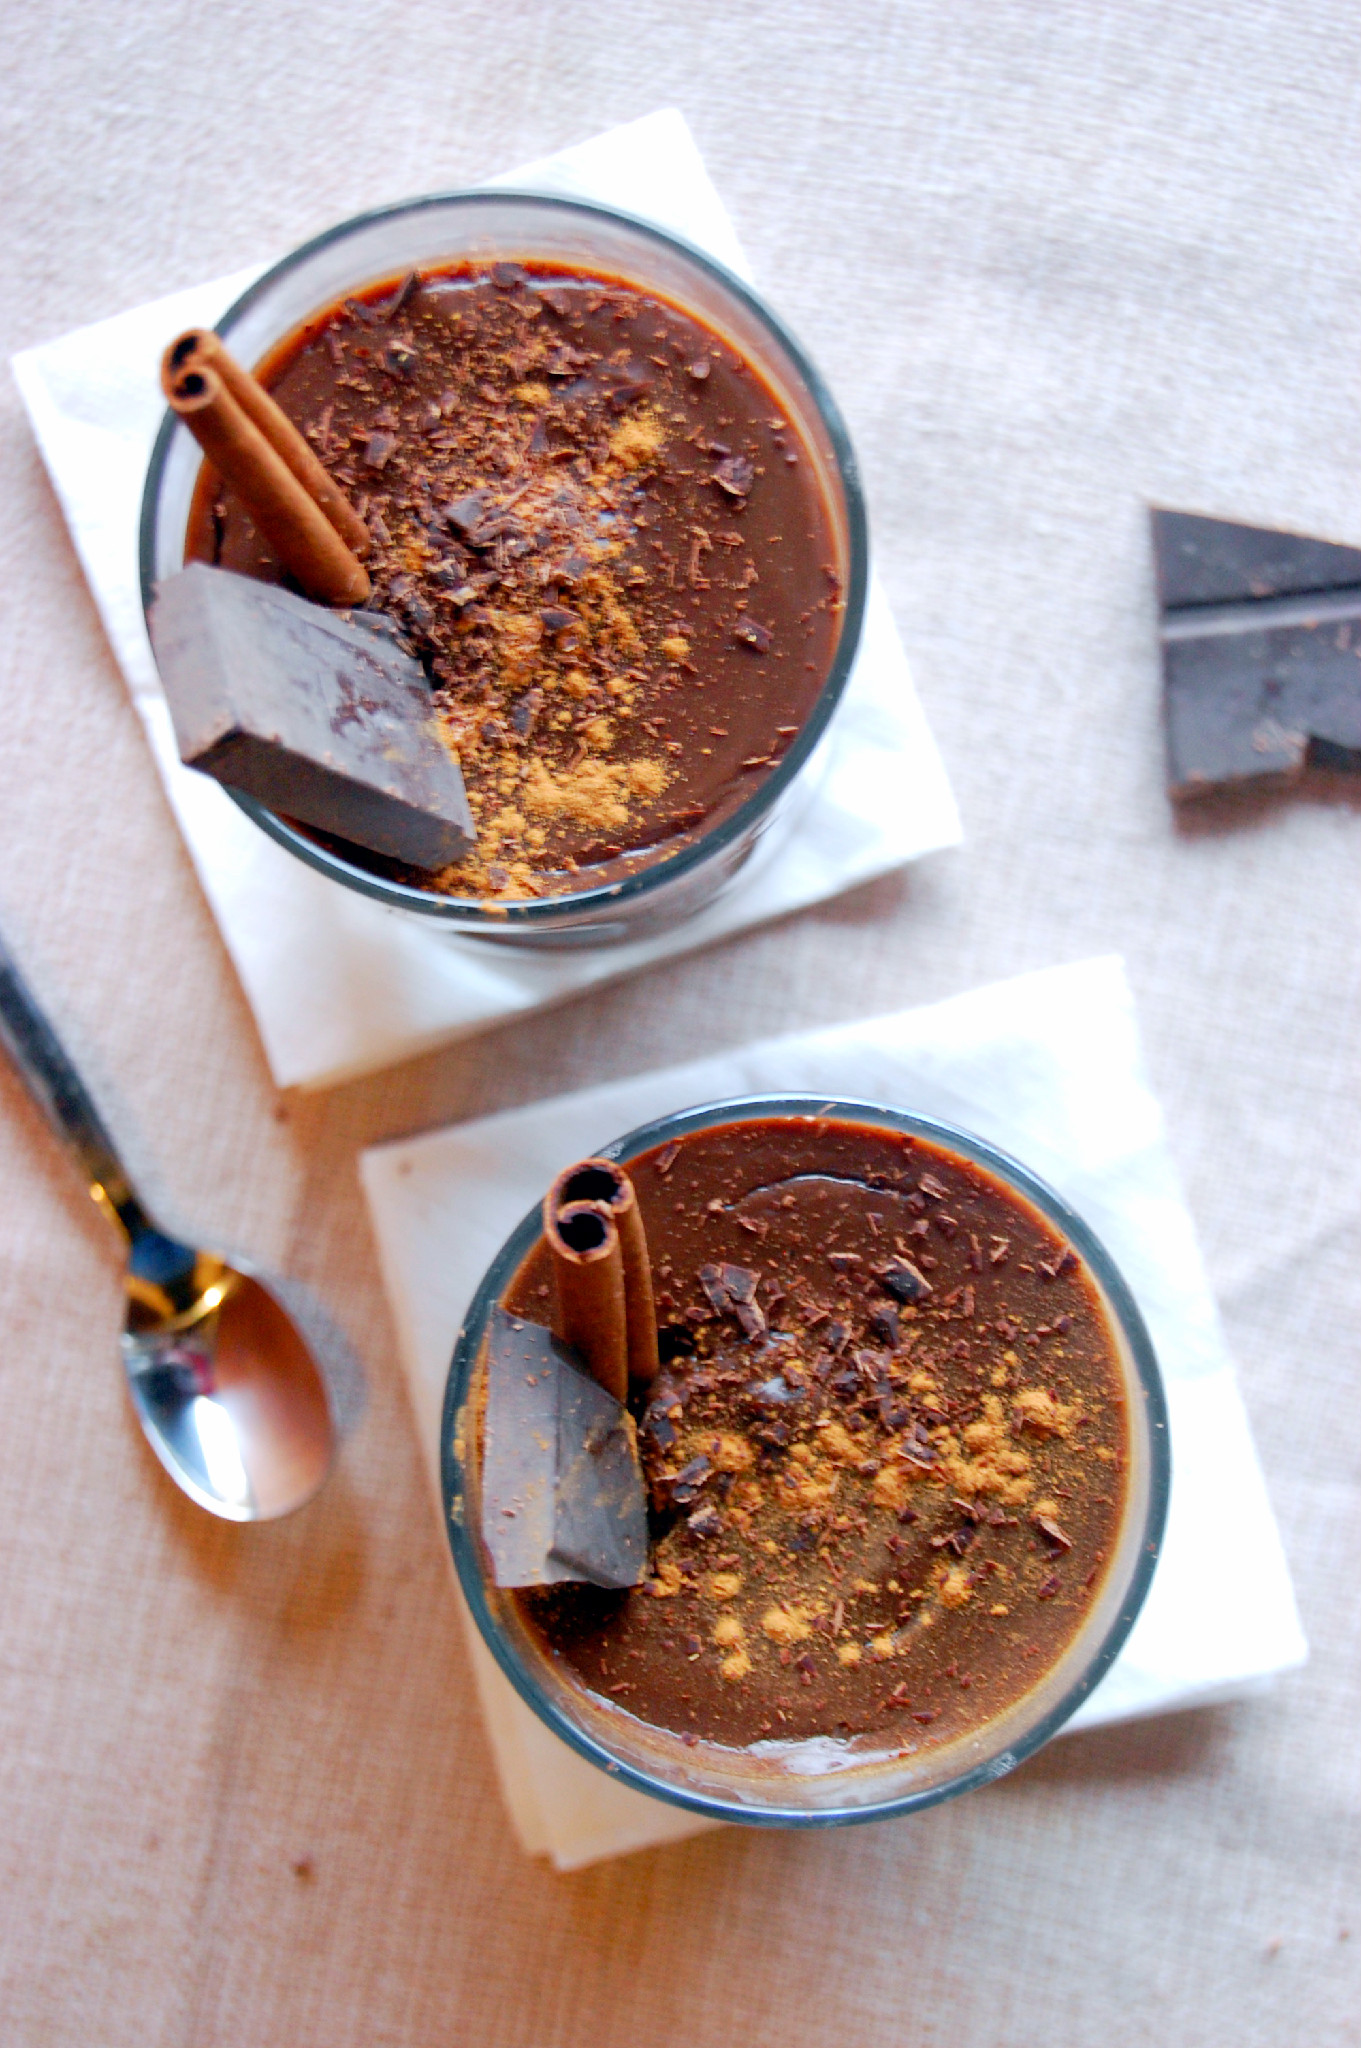 https://uprootkitchen.com/wp-content/uploads/2014/12/Mexican-Hot-Chocolate-Pudding-perfectly-spiced-and-easy-to-make-Uproot-from-Oregon.jpg